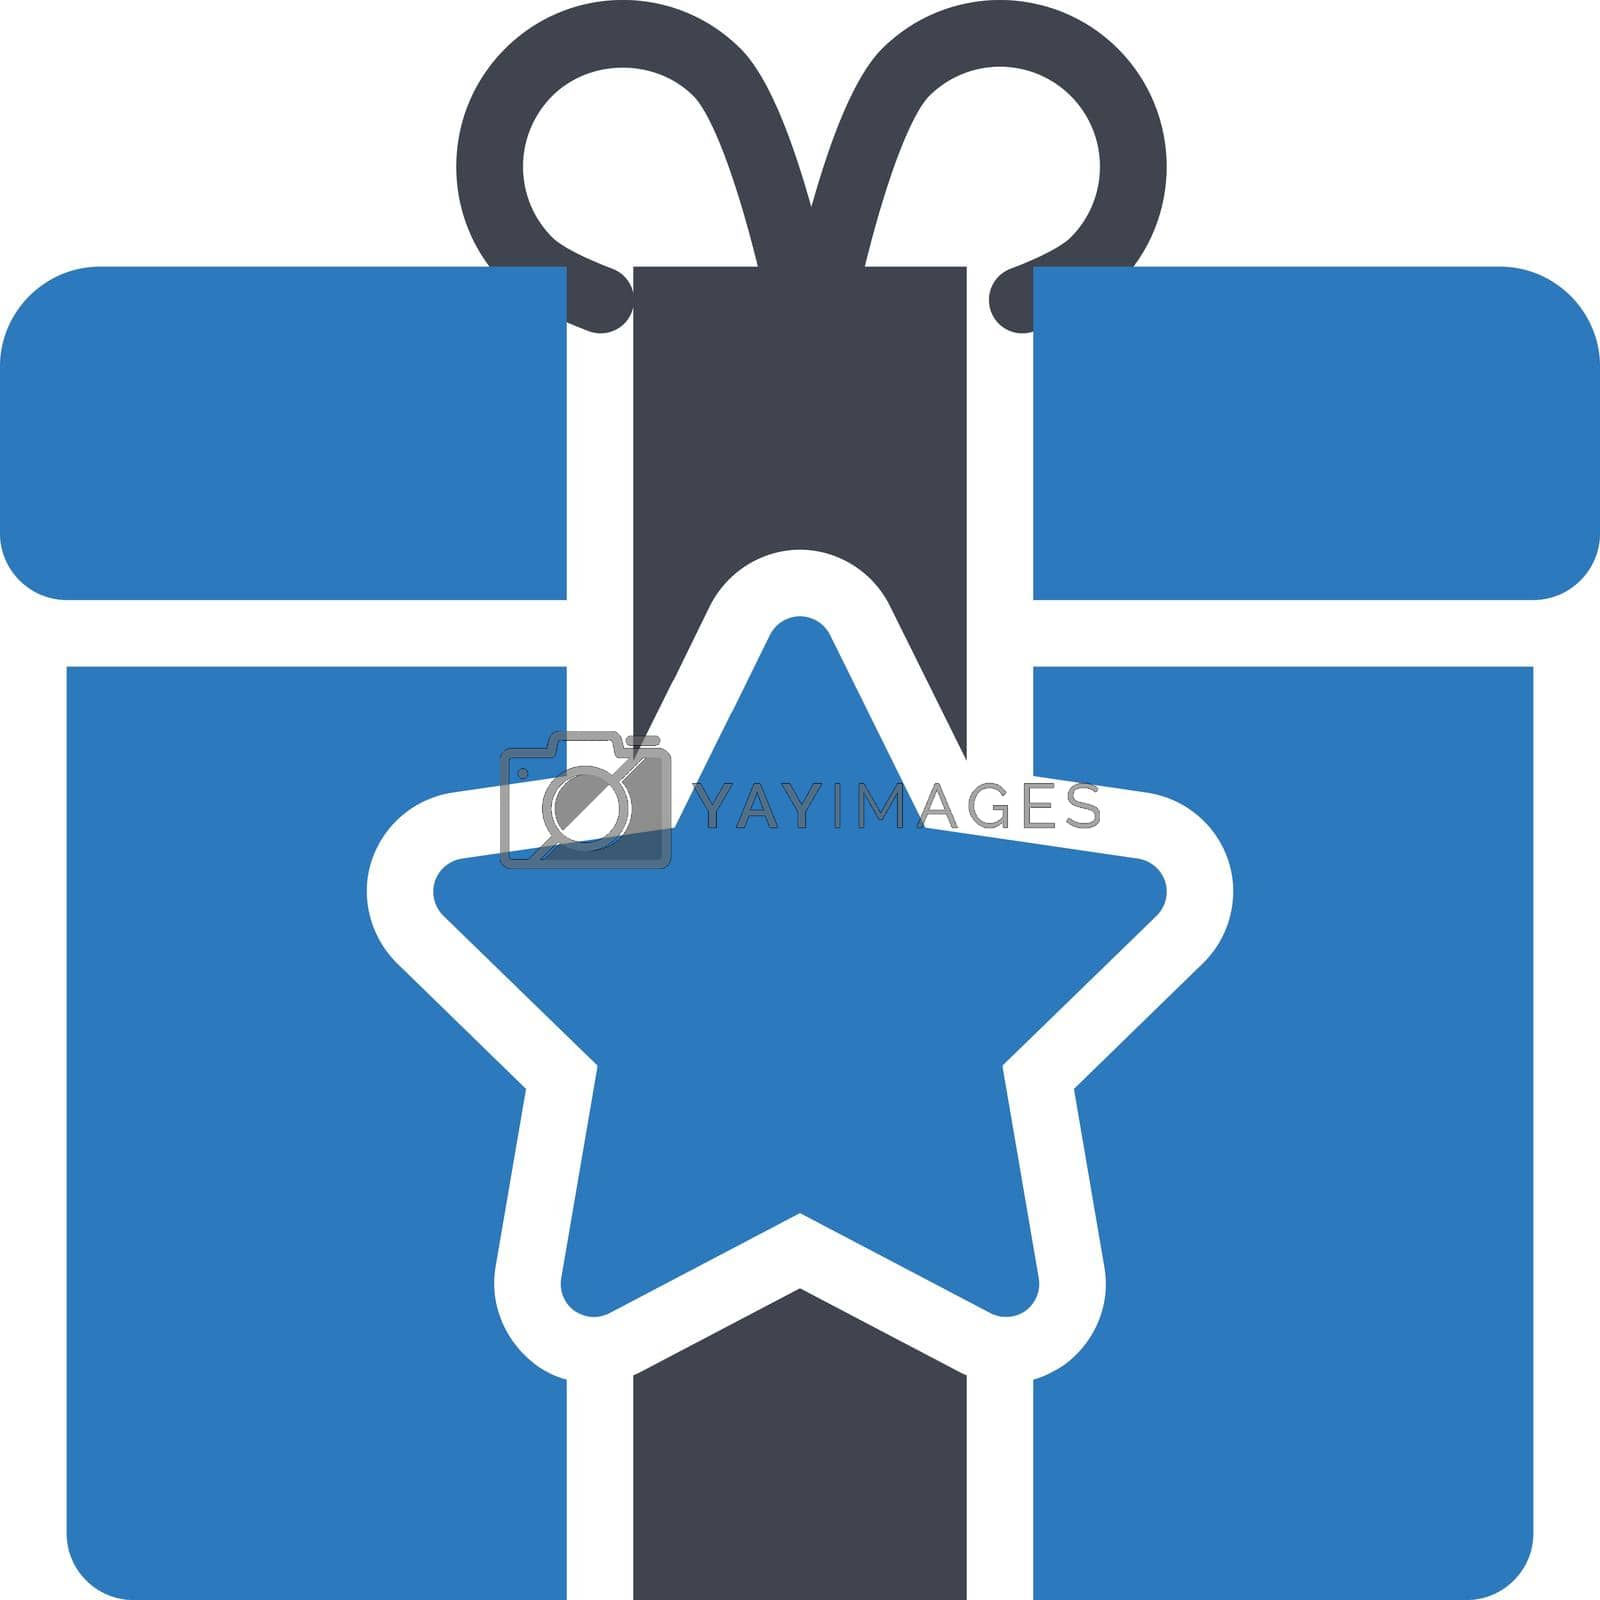 Royalty free image of gift box by vectorstall